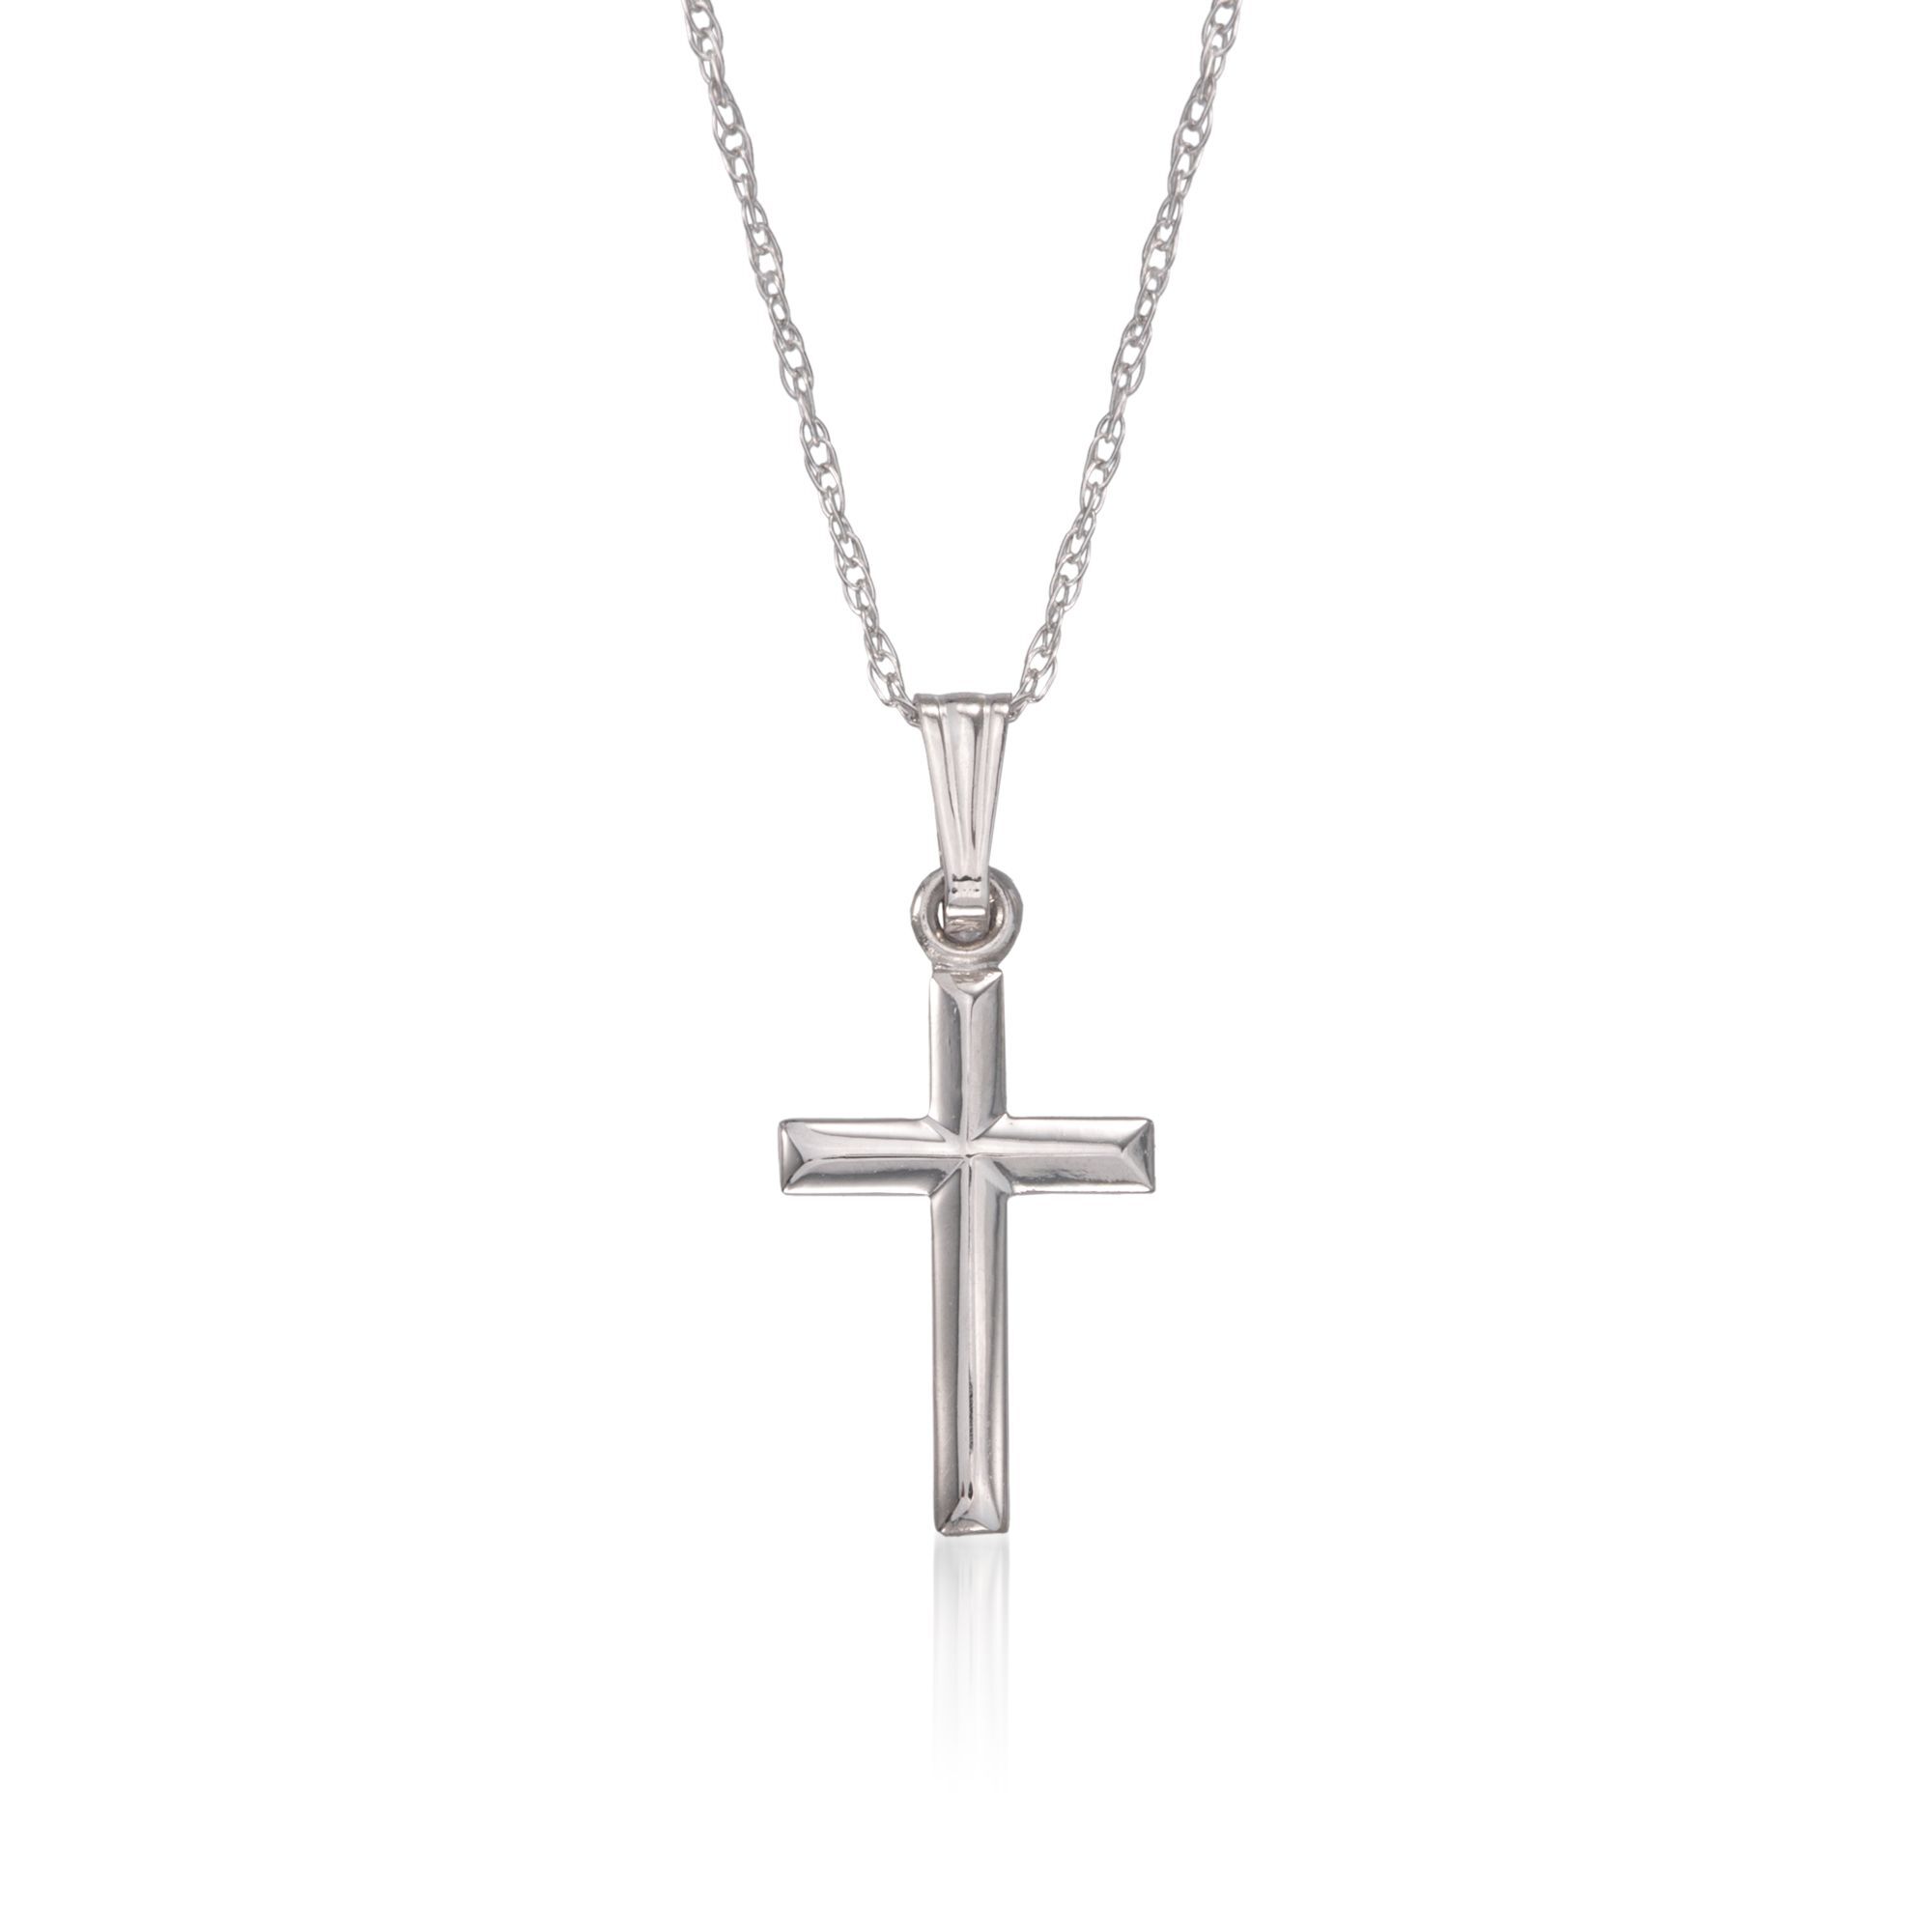 14kt White Gold Cross Necklace. 15 